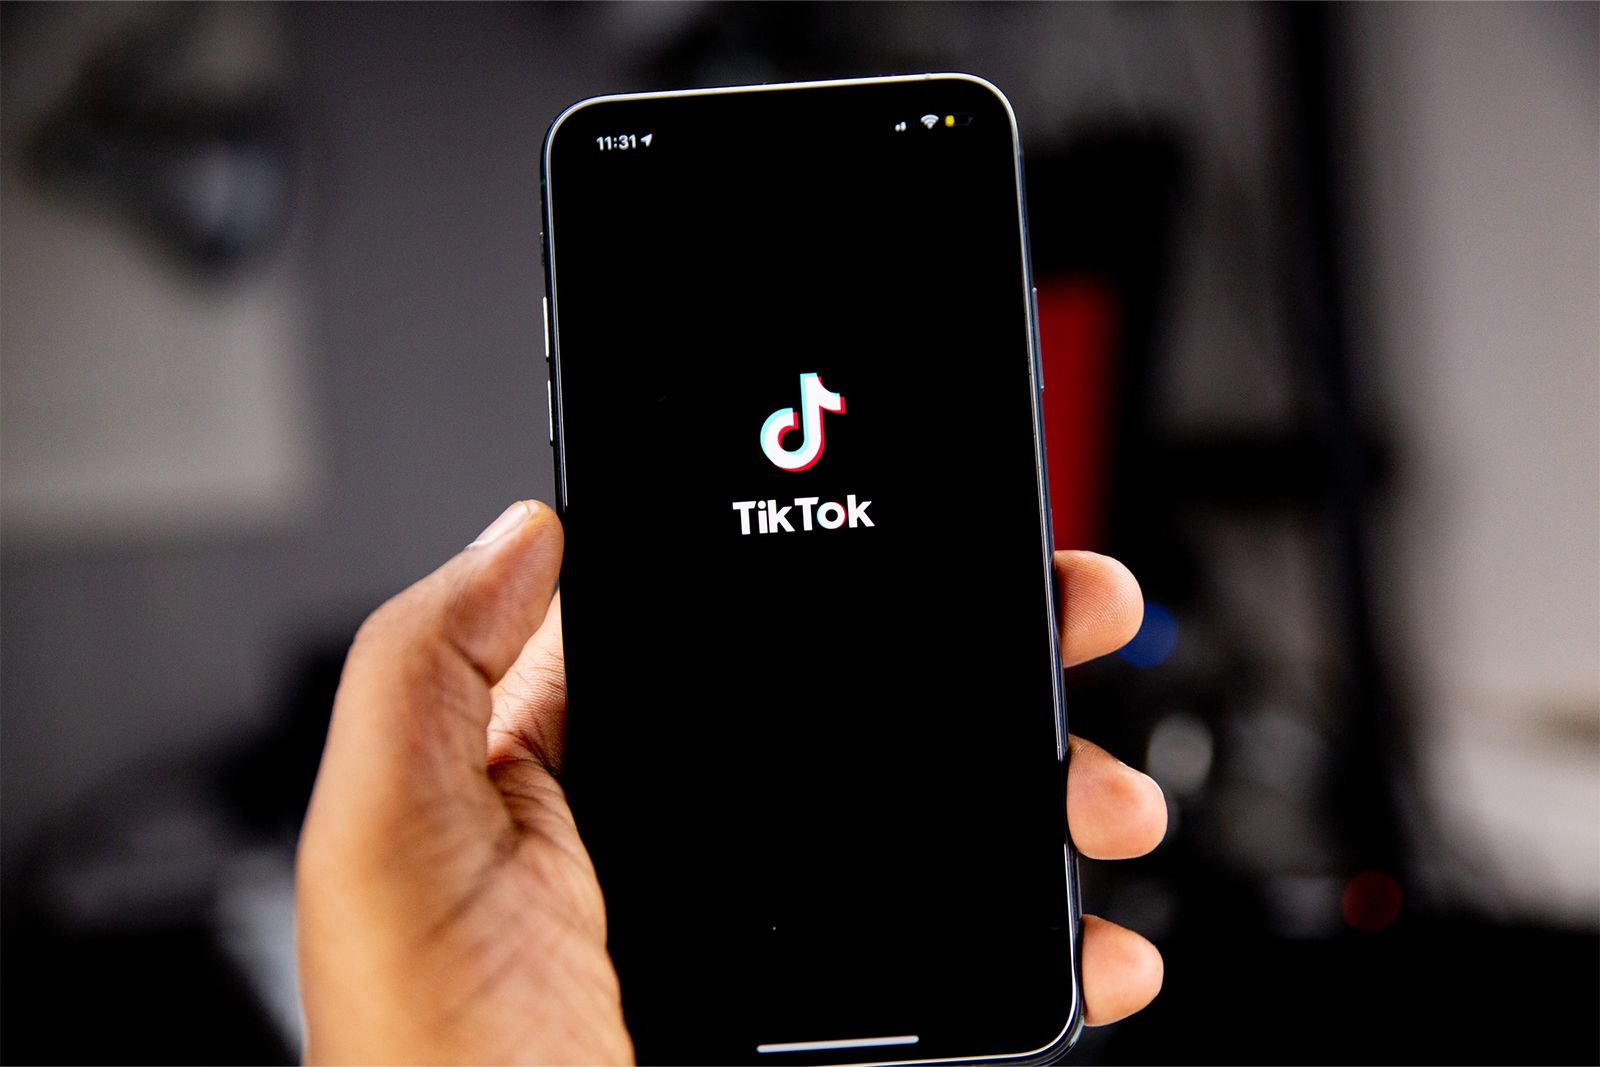 Step-to-Step Guide on How to Create a GIF from a TikTok Video